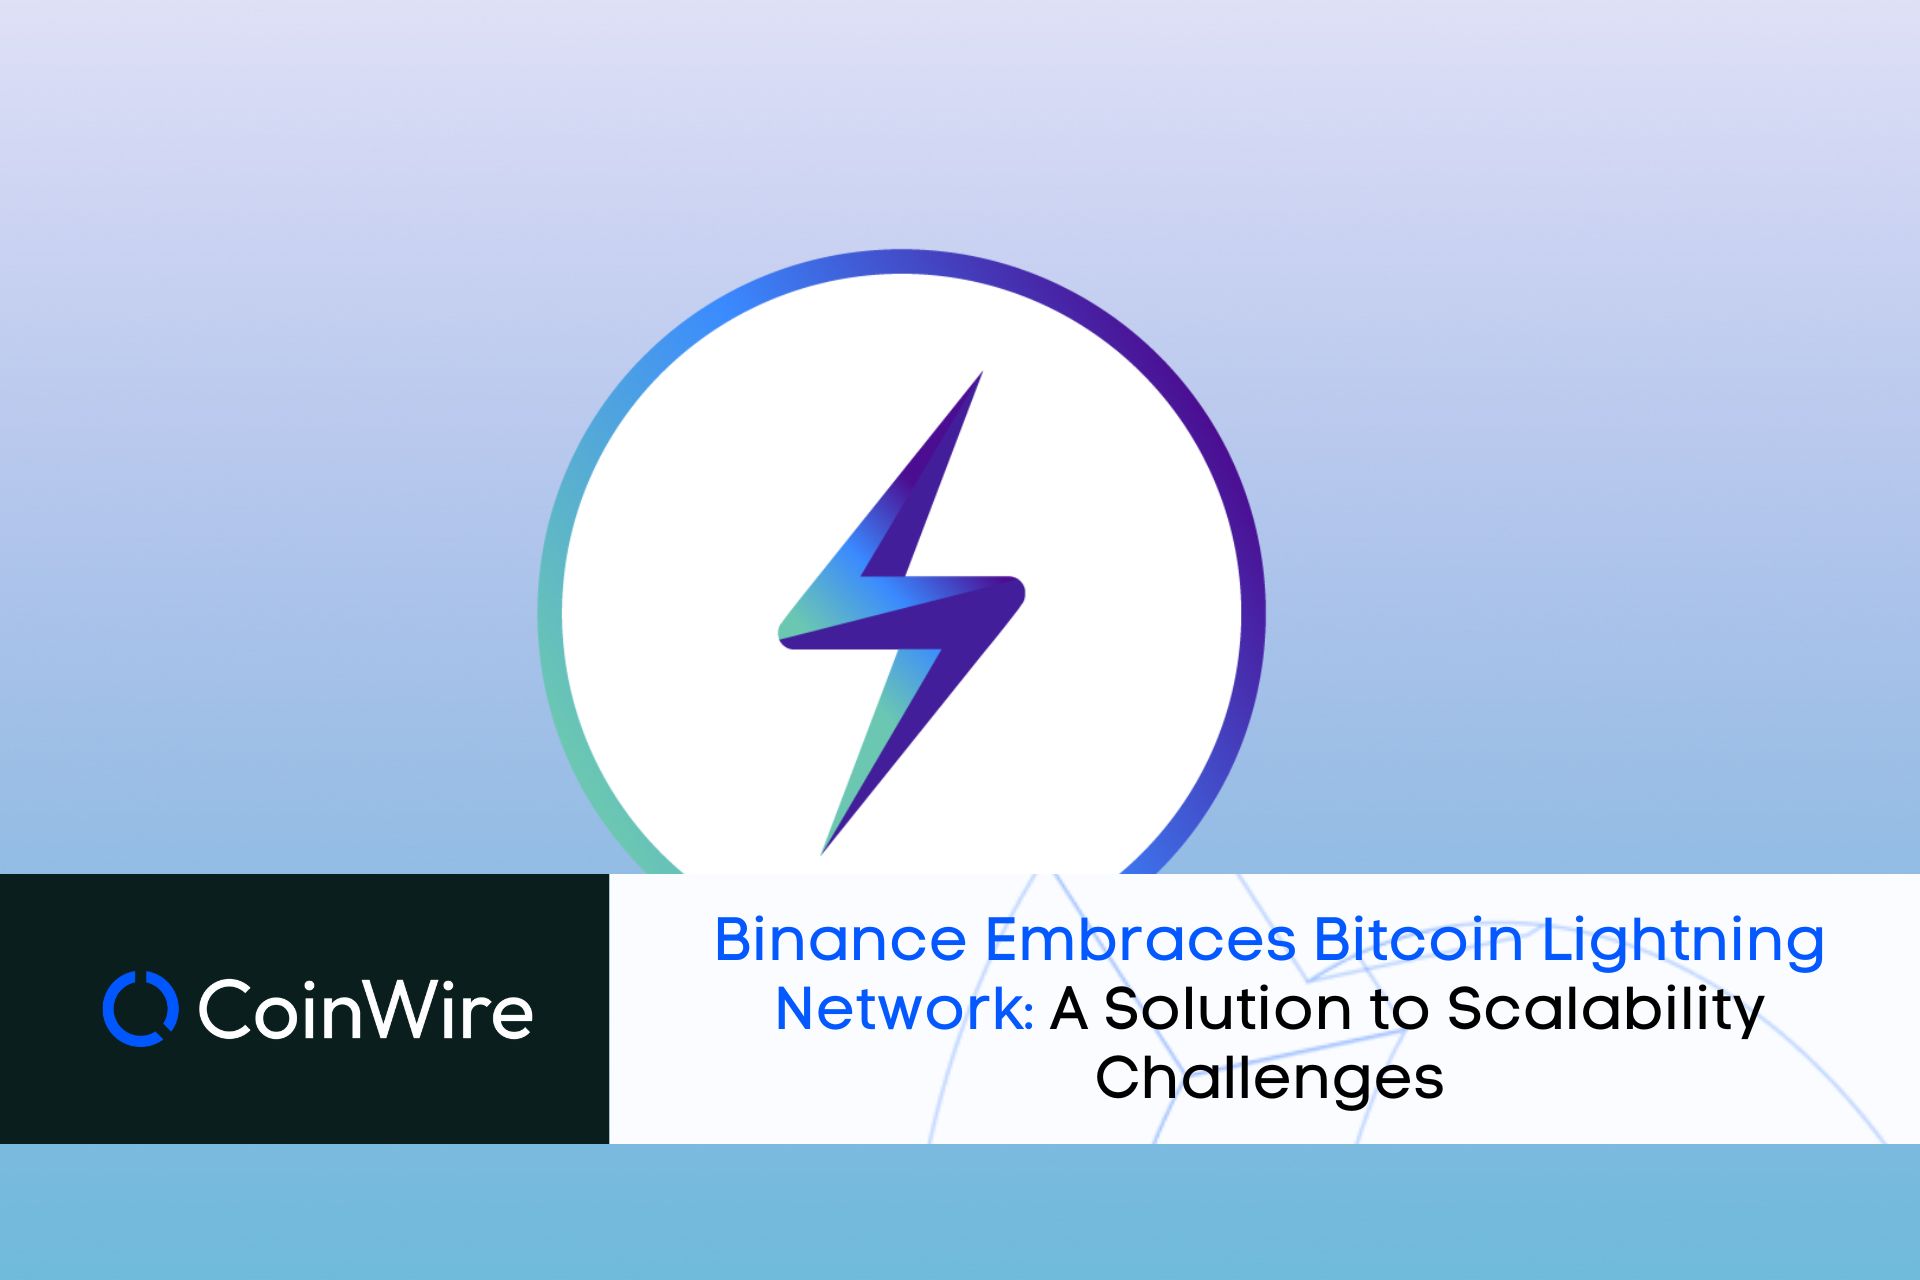 Binance Embraces Bitcoin Lightning Network: A Solution To Scalability Challenges